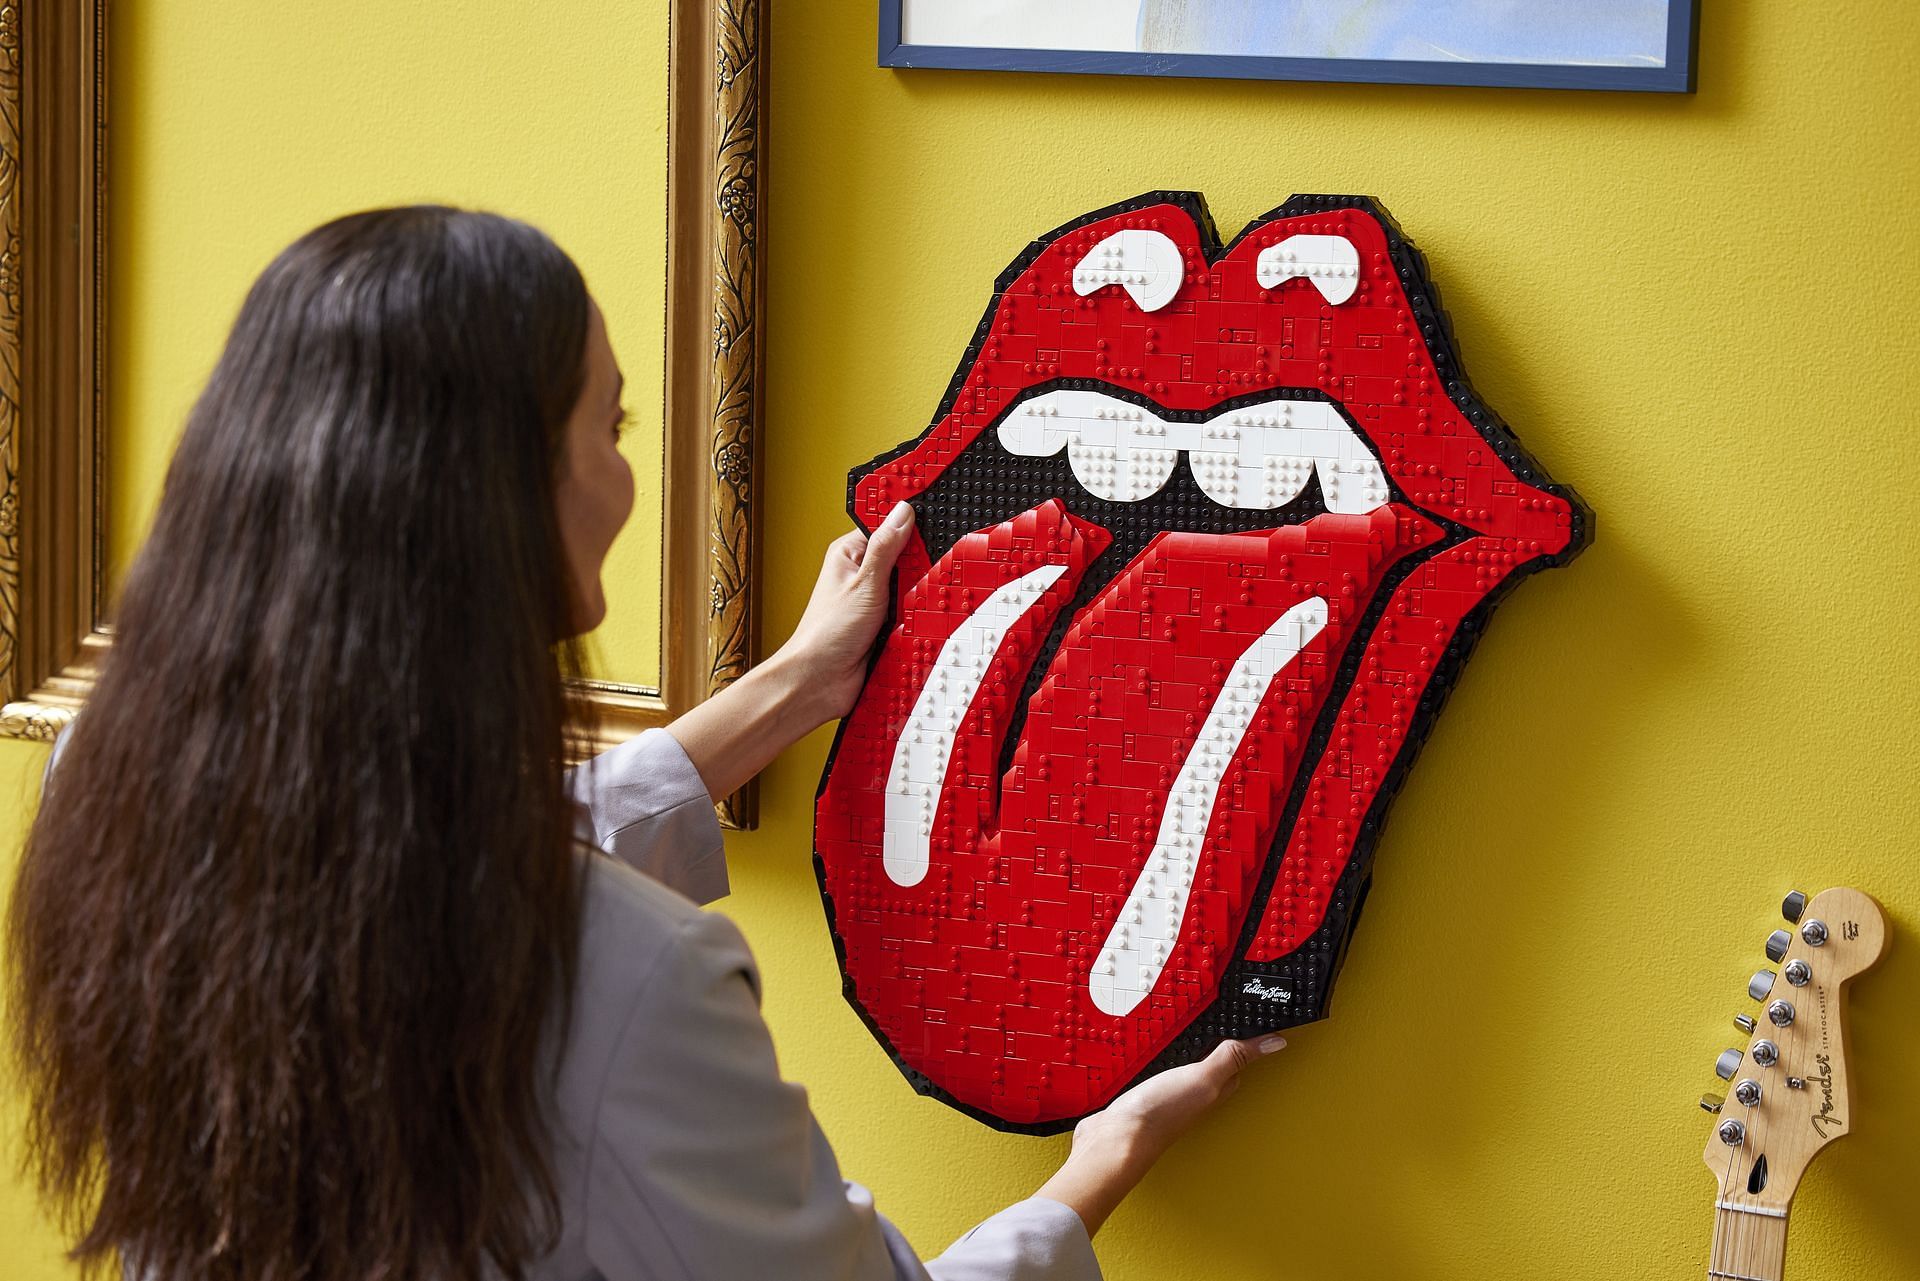 Lego launches Rolling Stones set piece (Image via The Lego Group)